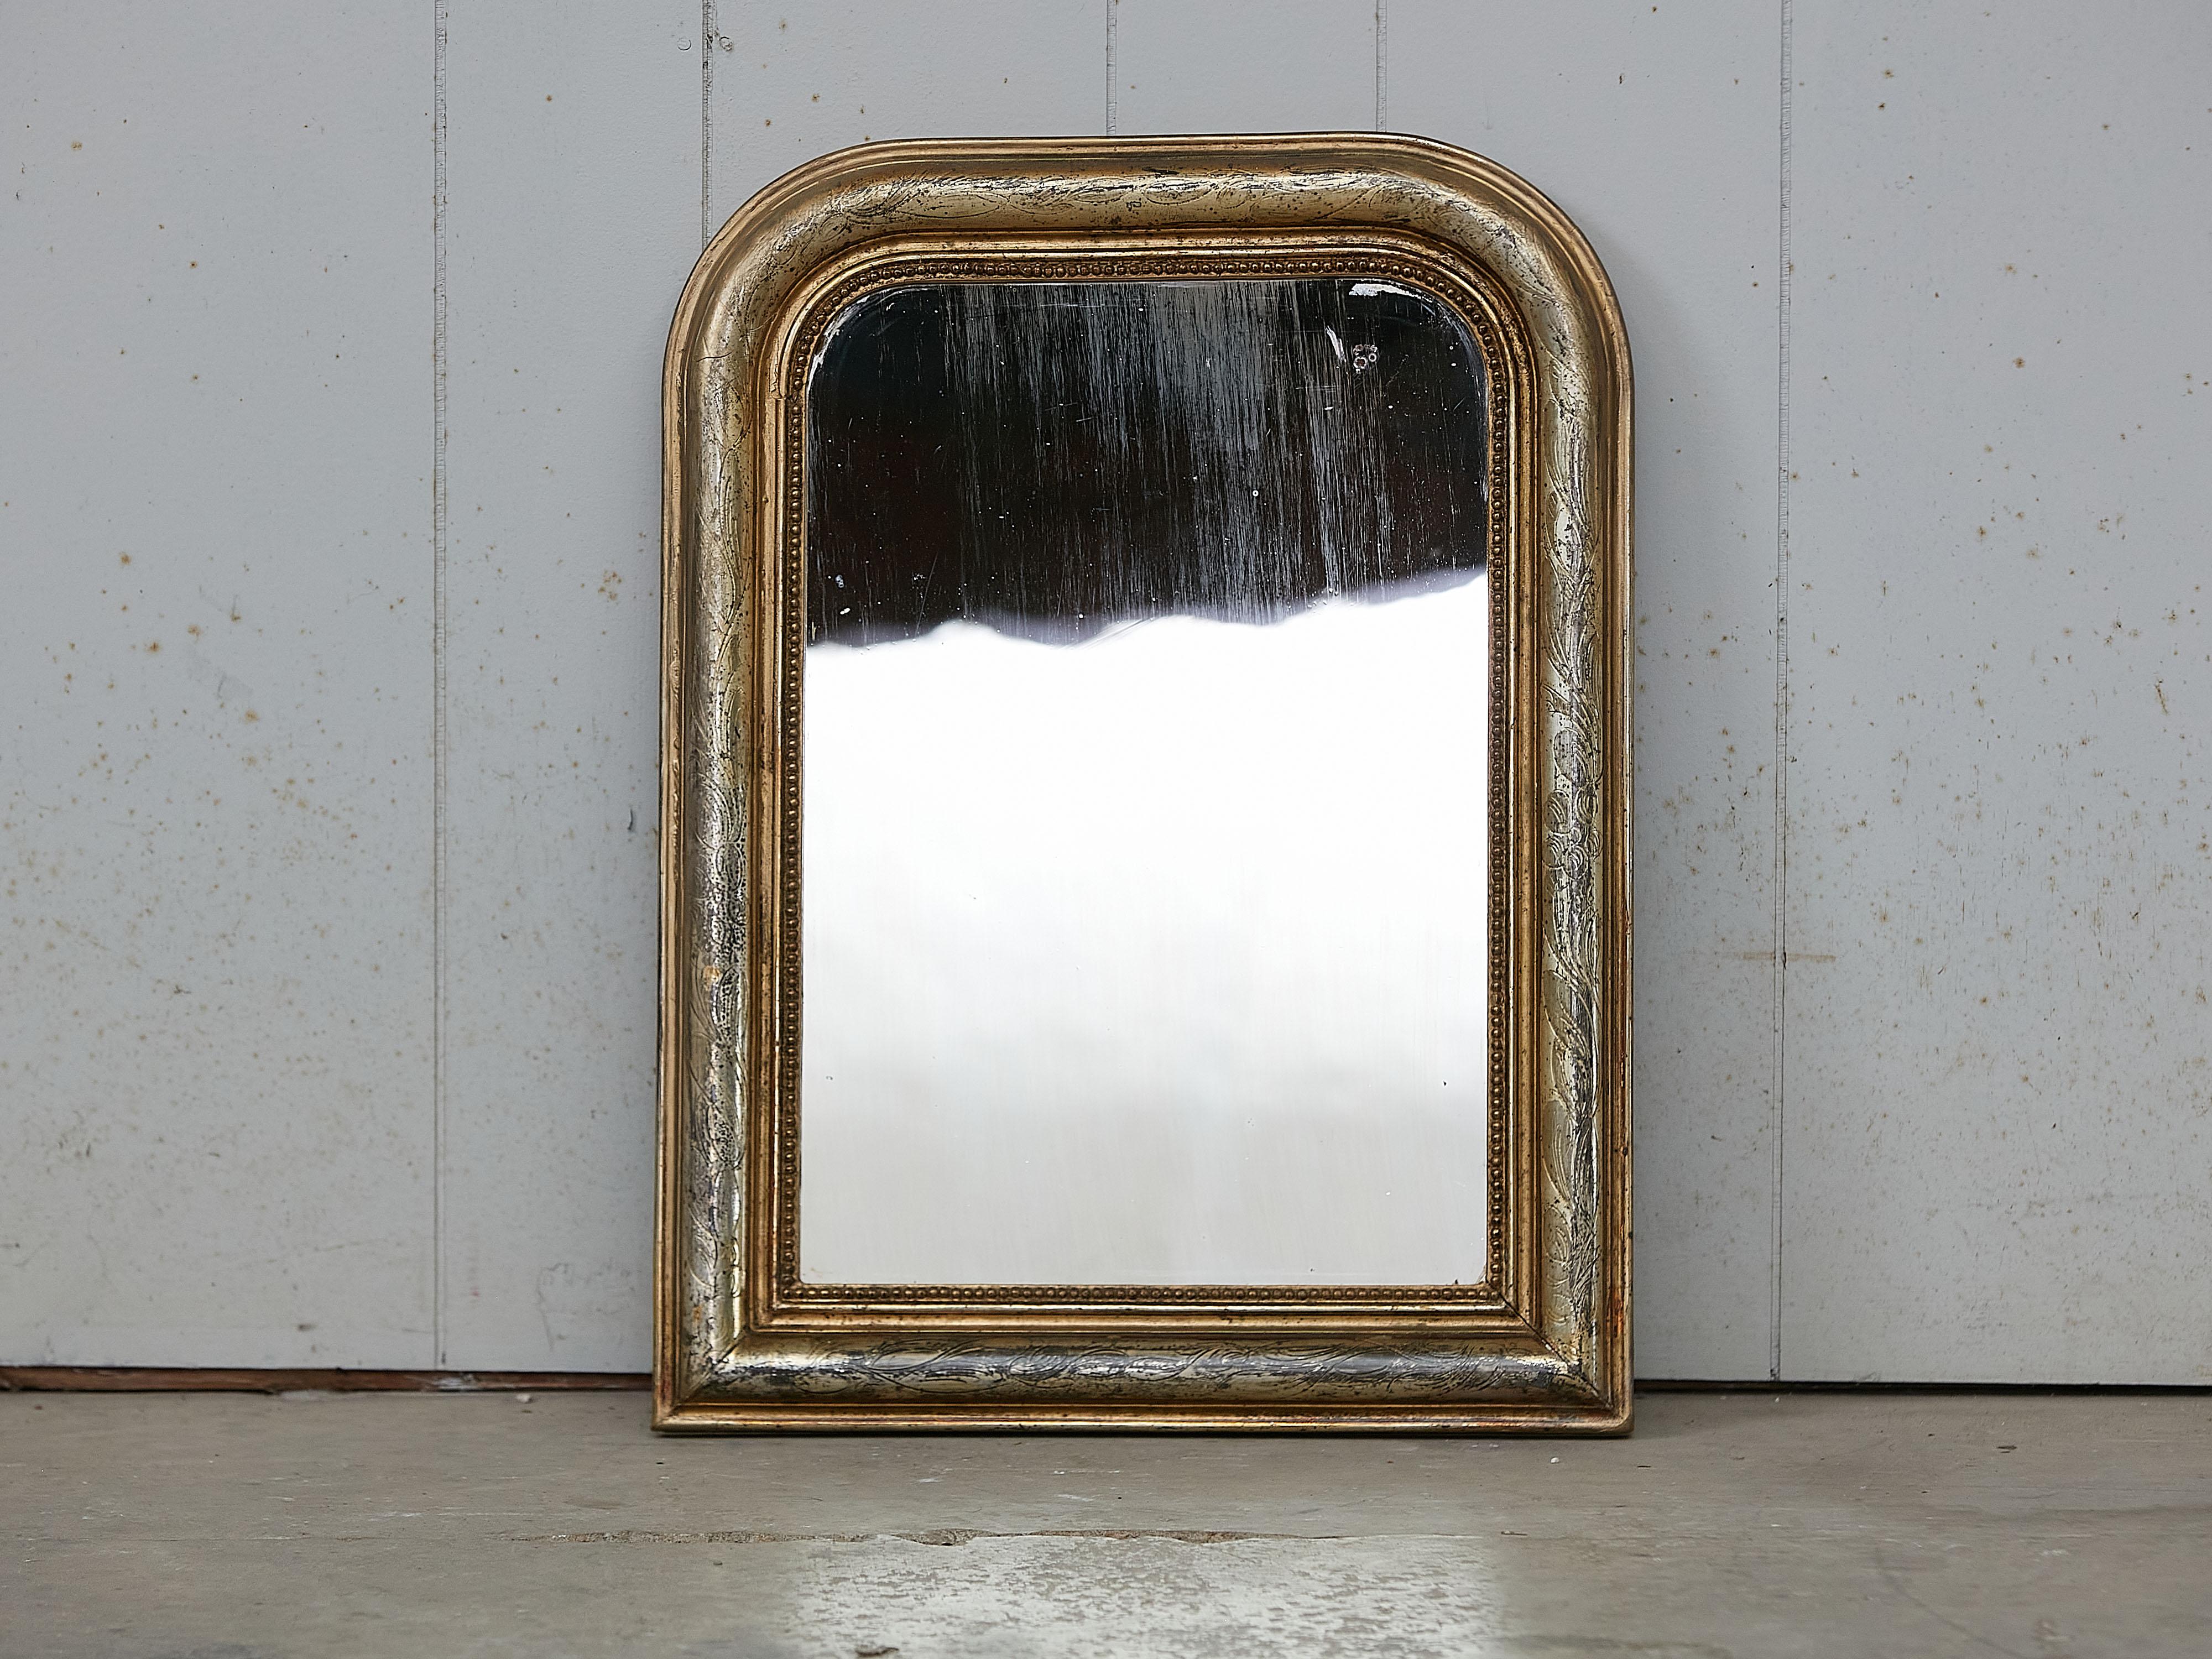 A French Louis-Philippe style gilt mirror from the early 20th century, with etched foliage motifs. Created in France during the early years of the 20th century, this wall mirror showcases the typical lines of the Louis-Philippe period. Adorned with